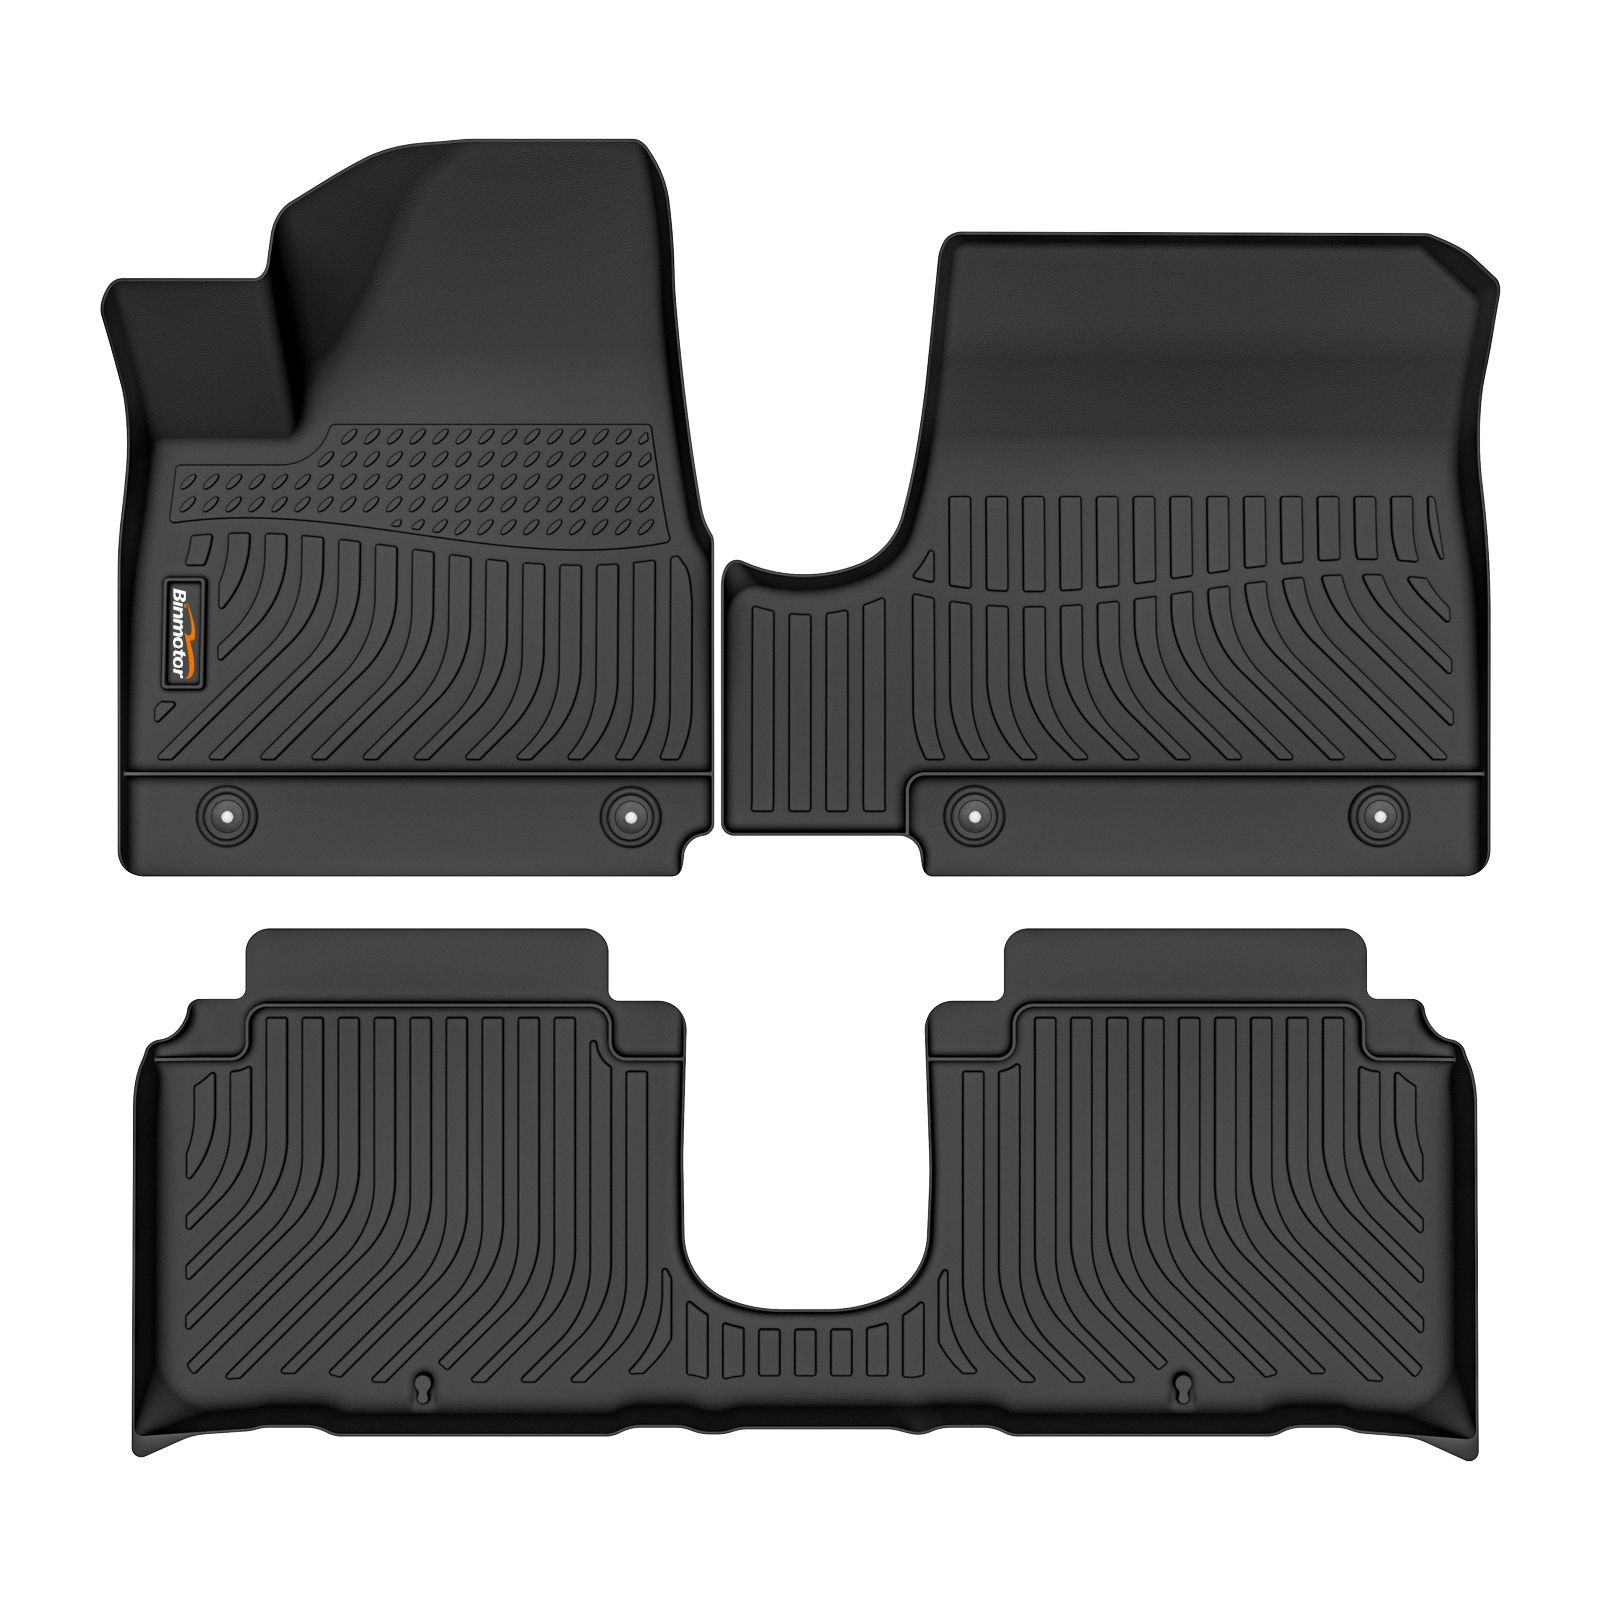 Binmotor-Floor Mats All Weather Floor Mats for Hyundai Ioniq 5 Movable Console (Limited Models), 1st & 2nd Row Full Set, Heavy Duty Car Floor Liners-Black IONIQ5 Accessories（compatible year 2022-2024）